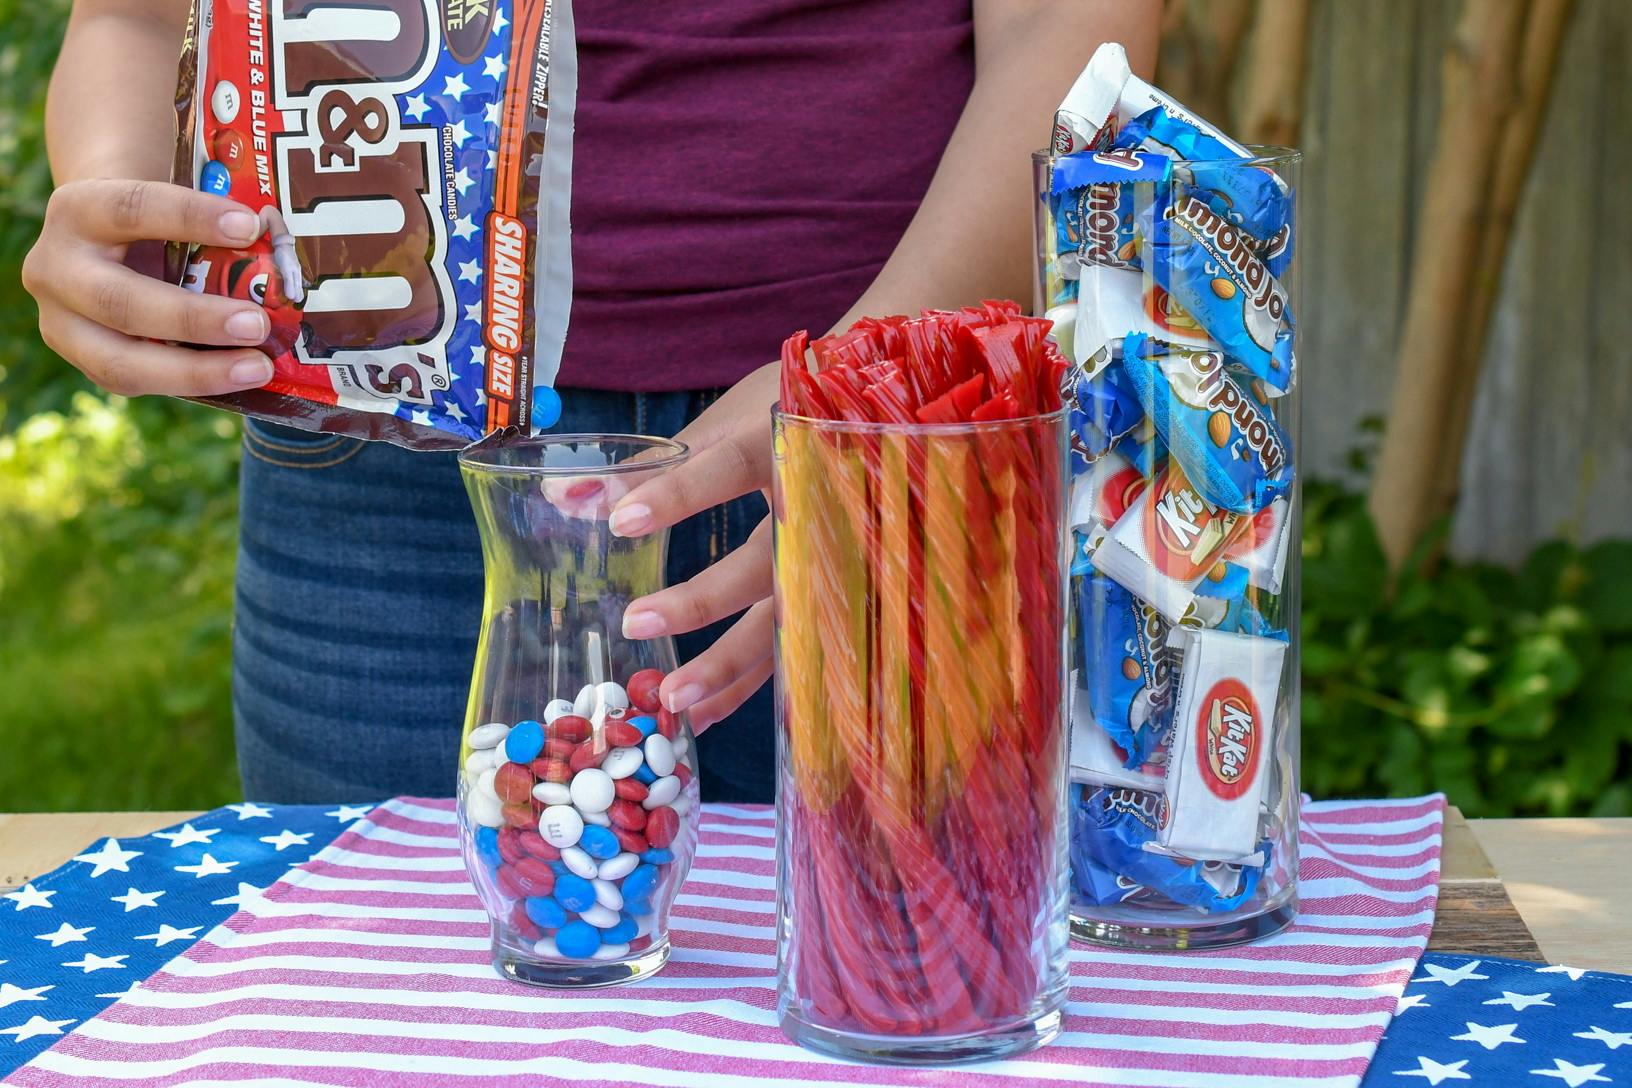 A person pouring red, white, and blue M&Ms into a glass vase next to two more glass containers filled with licorice and mini candy bars.